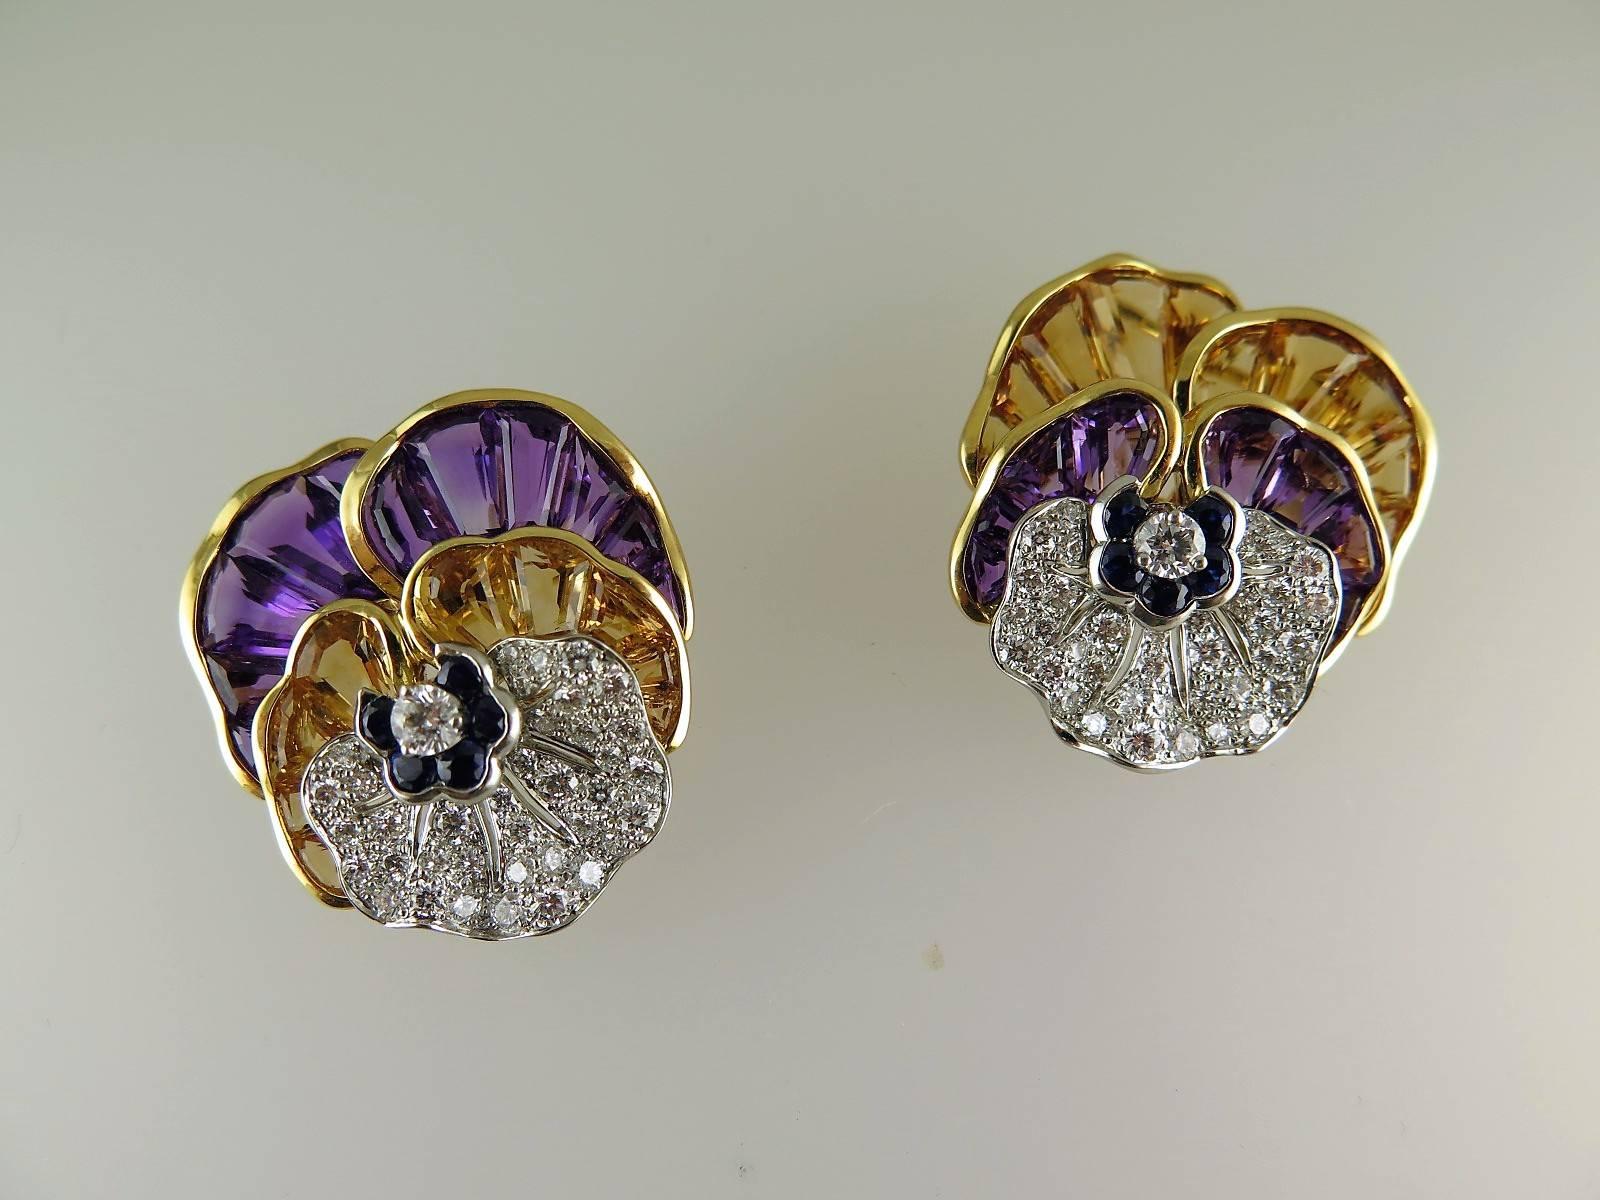 The petals set with channel-set calibre-cut amethyst and citrines and pavé-set brilliant-cut diamonds to the single brilliant-cut diamond centre with circular-cut sapphire detail, mounted in 18ct gold, numbered, makers mark. These are particularly